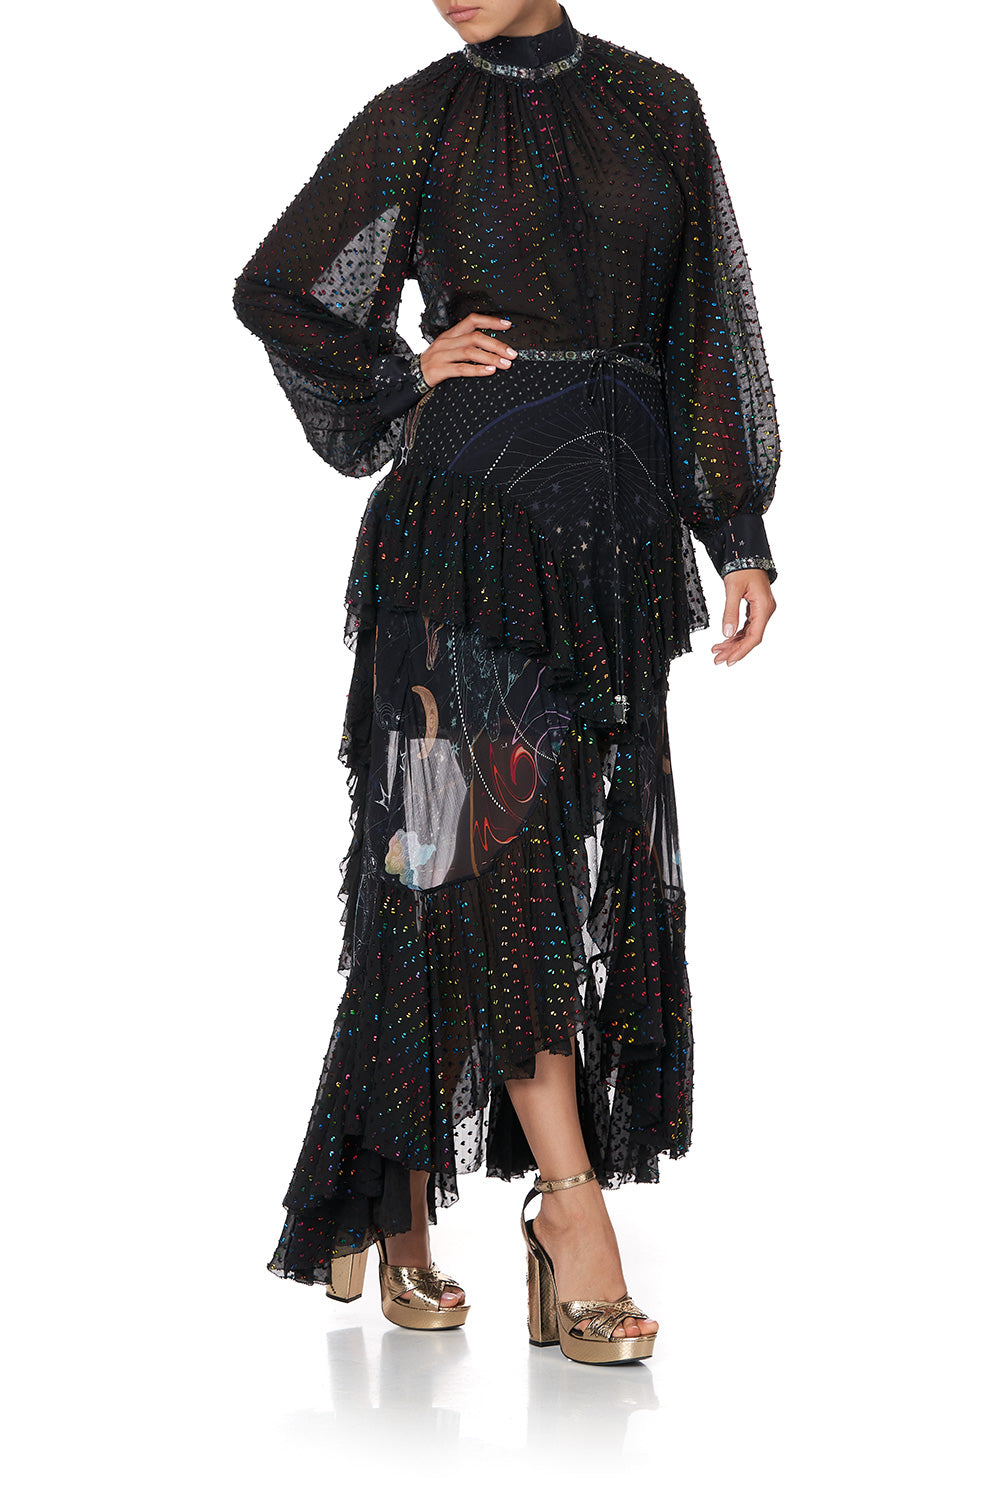 MAXI SKIRT WITH DOUBLE FRILL MIDNIGHT MOON HOUSE